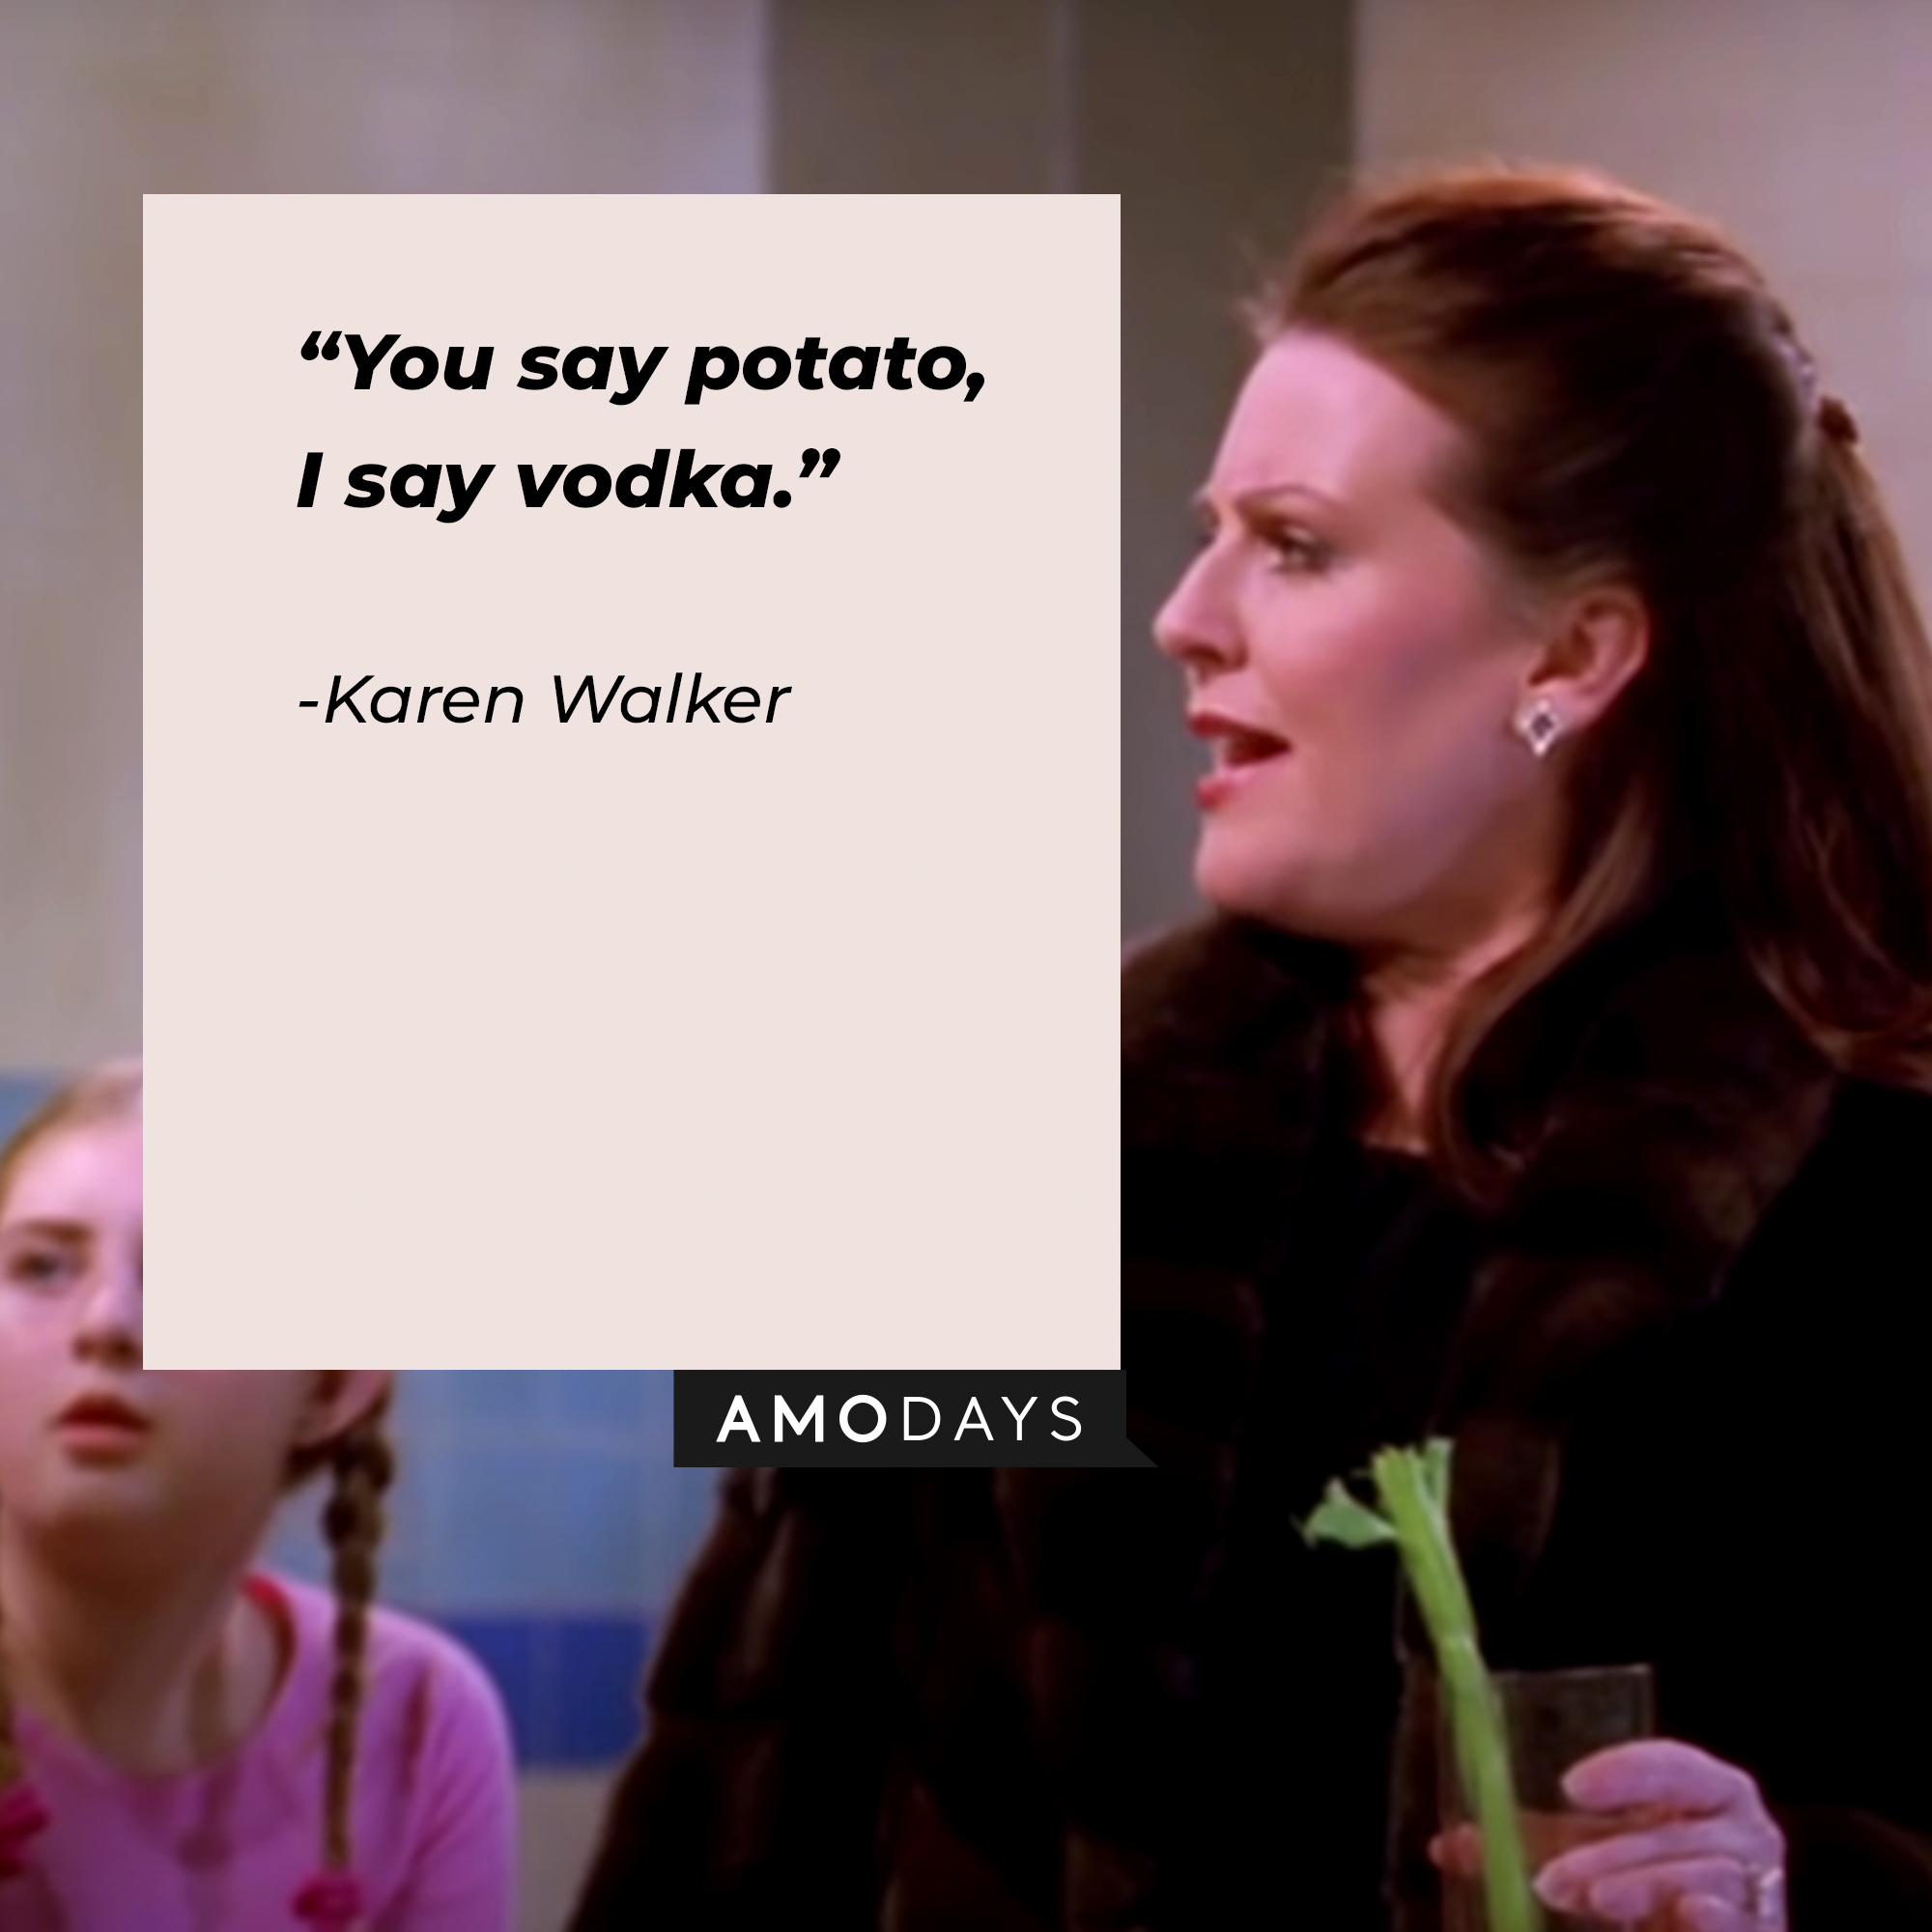 A photo of Karen Walker with the quote, "You say potato, I say vodka." | Source: YouTube/ComedyBites